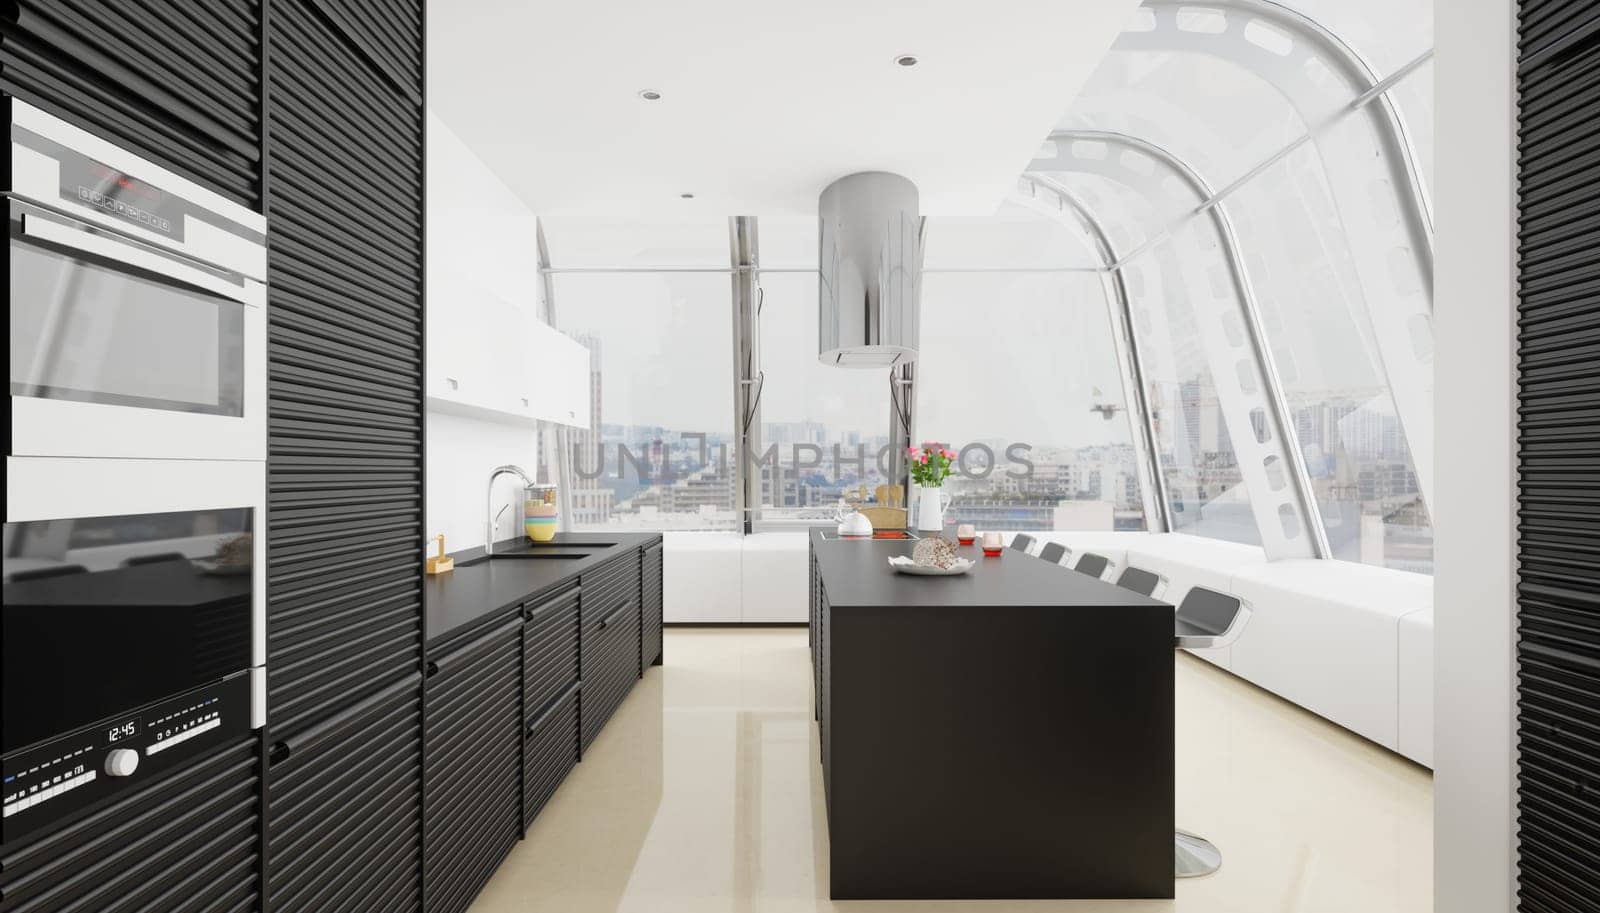 interior of modern kitchen with black and white furniture. 3d rendering